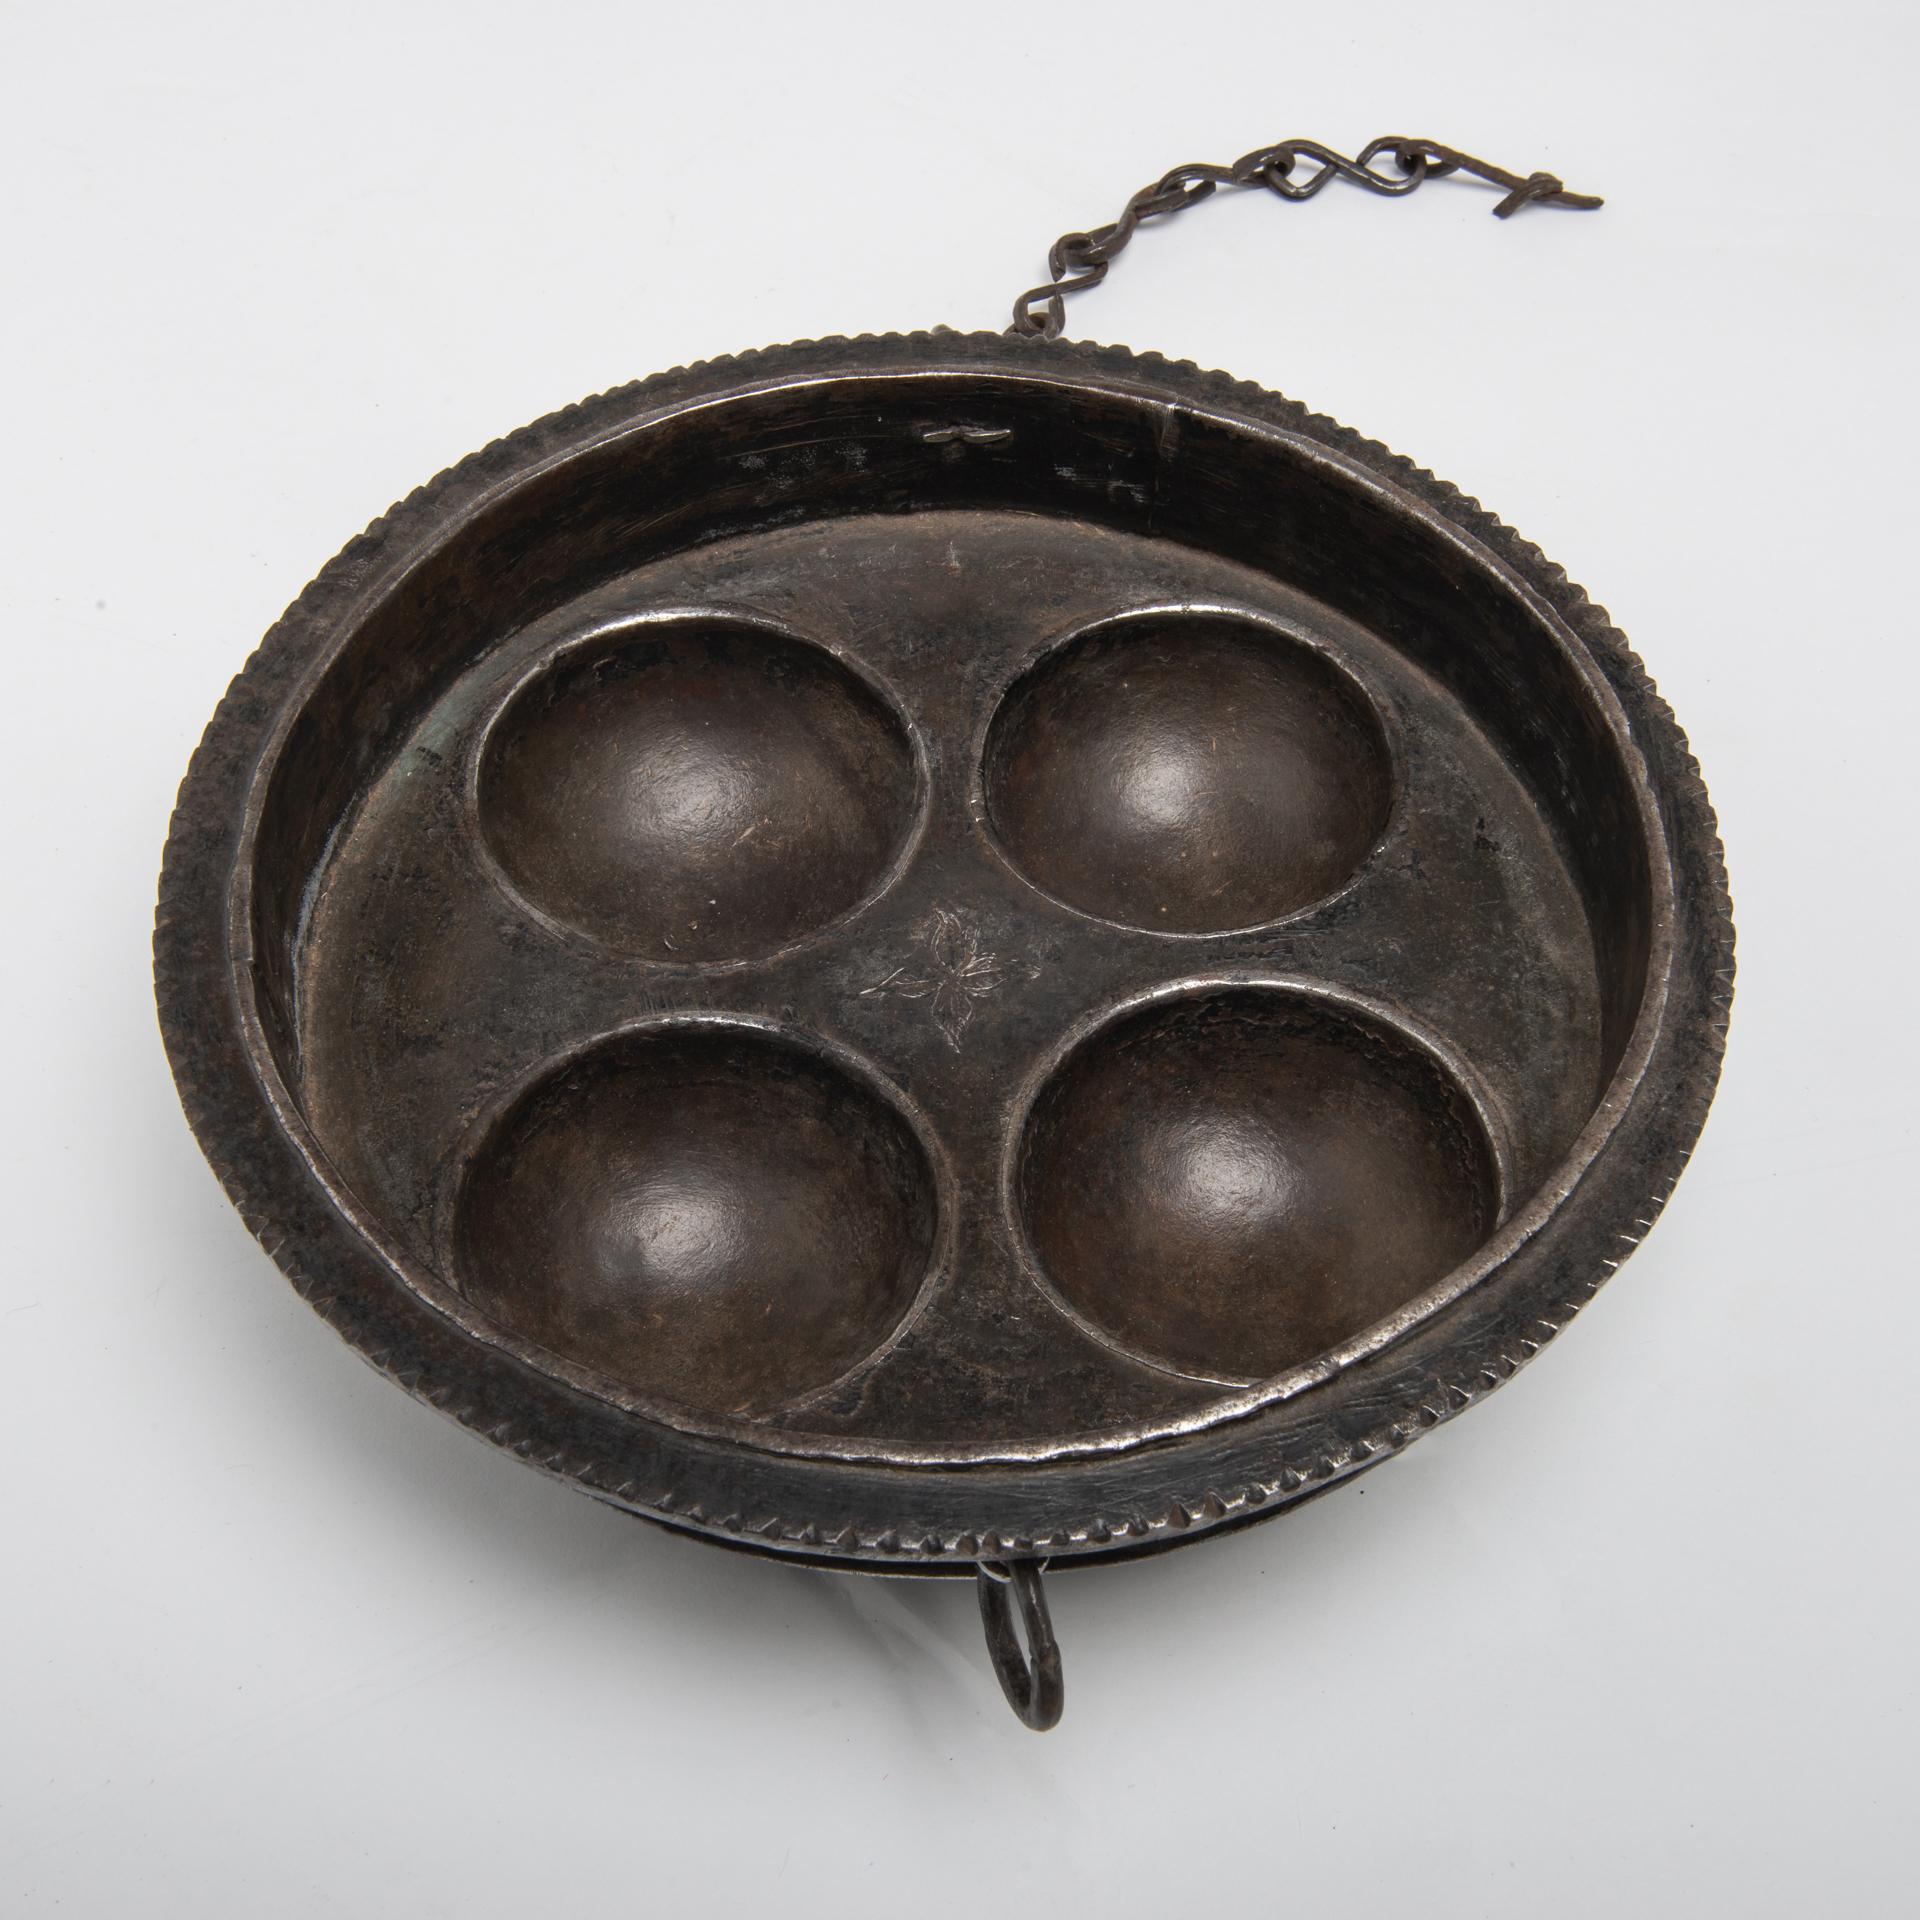 O/292-6-  A friend of mine found this iron pot in Tibet: it's a strange particular pot in heavy iron with round compartments.
The chain was used to hang it when not in use.
Now how to use it ? To make pancakes or round cakes ? It's heavy and sturdy.